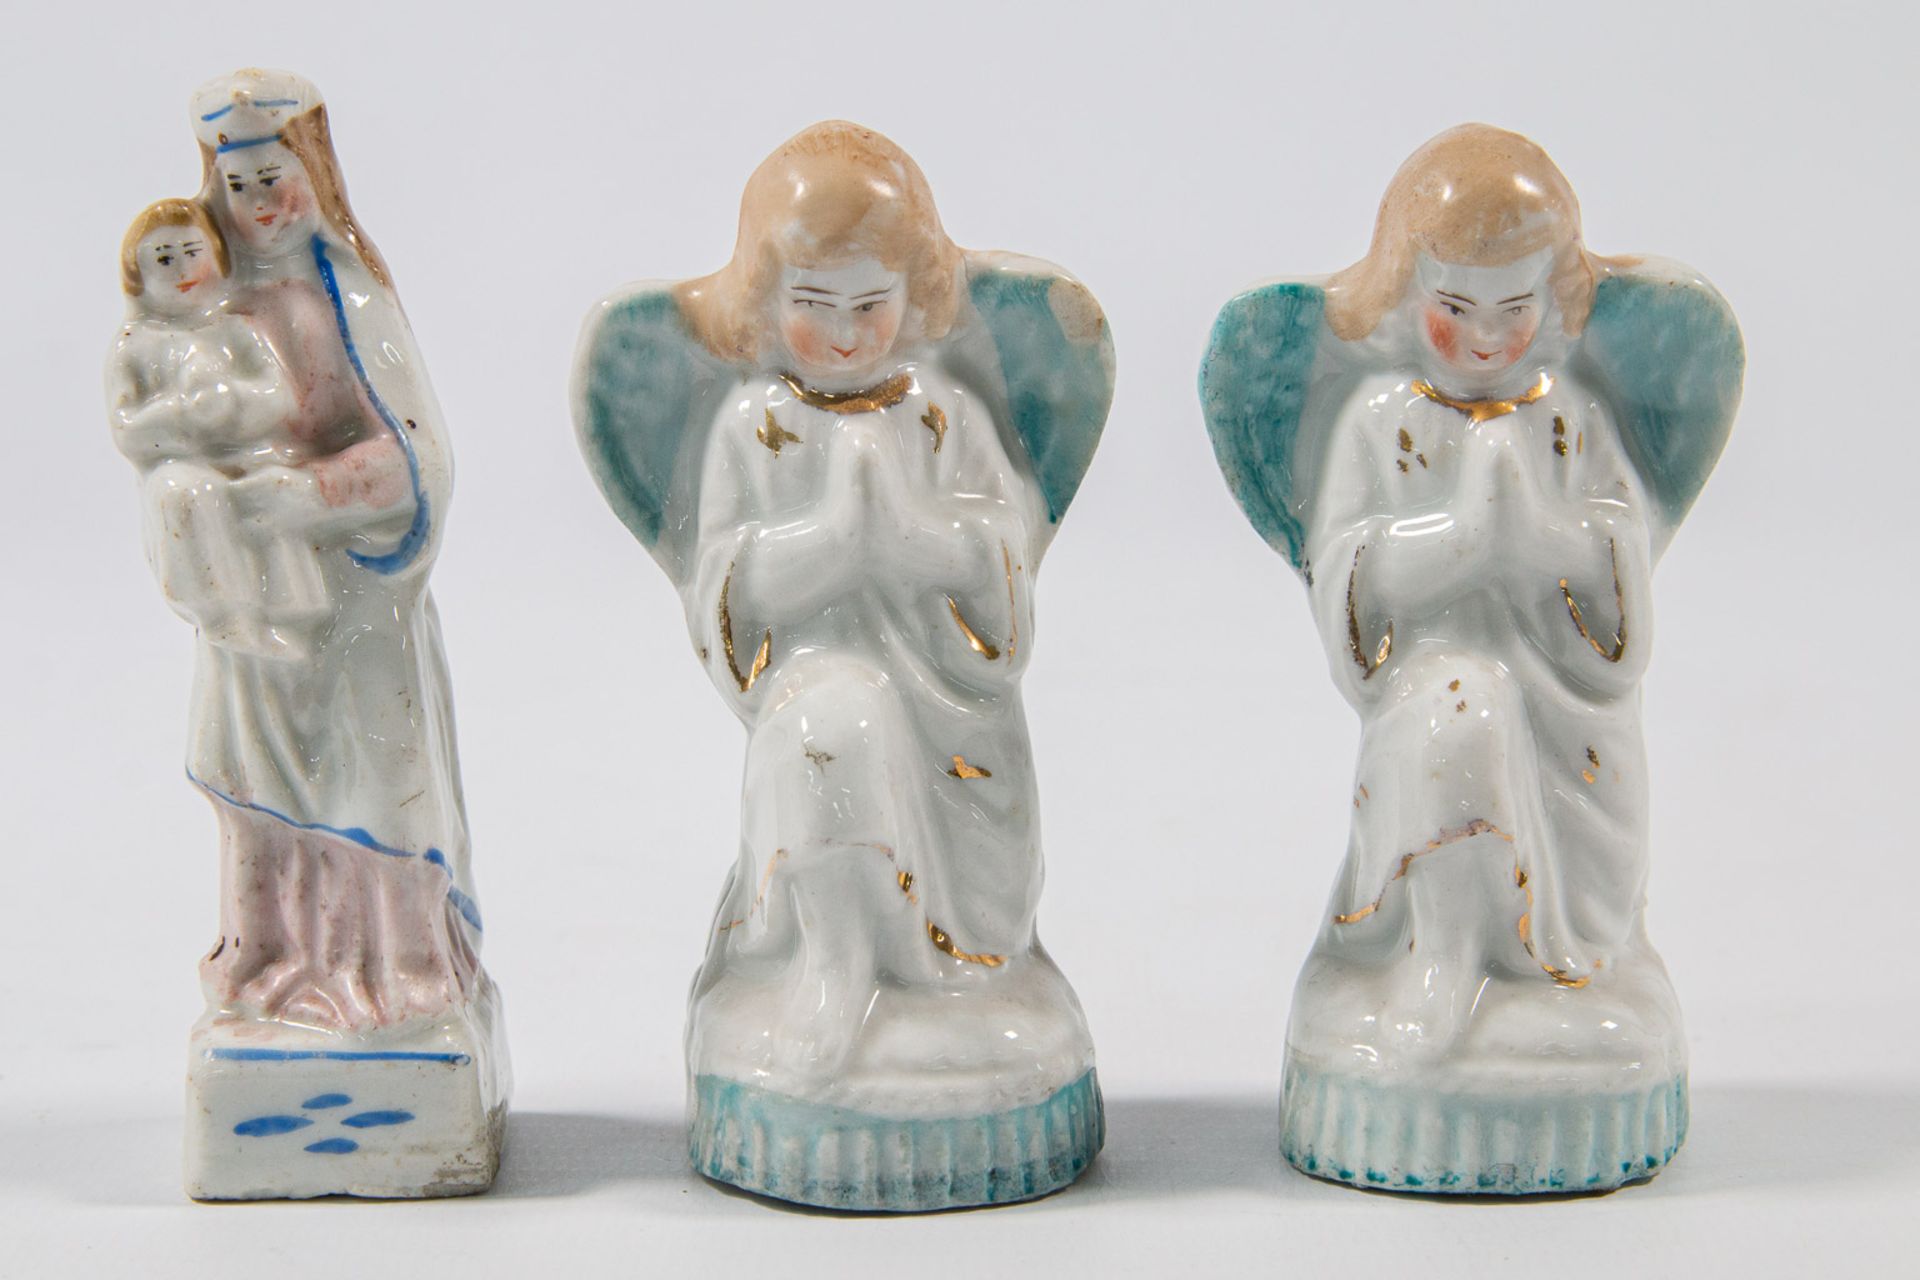 A collection of 11 bisque porcelain holy statues, Mary, Joseph, and Madonna. - Image 39 of 49